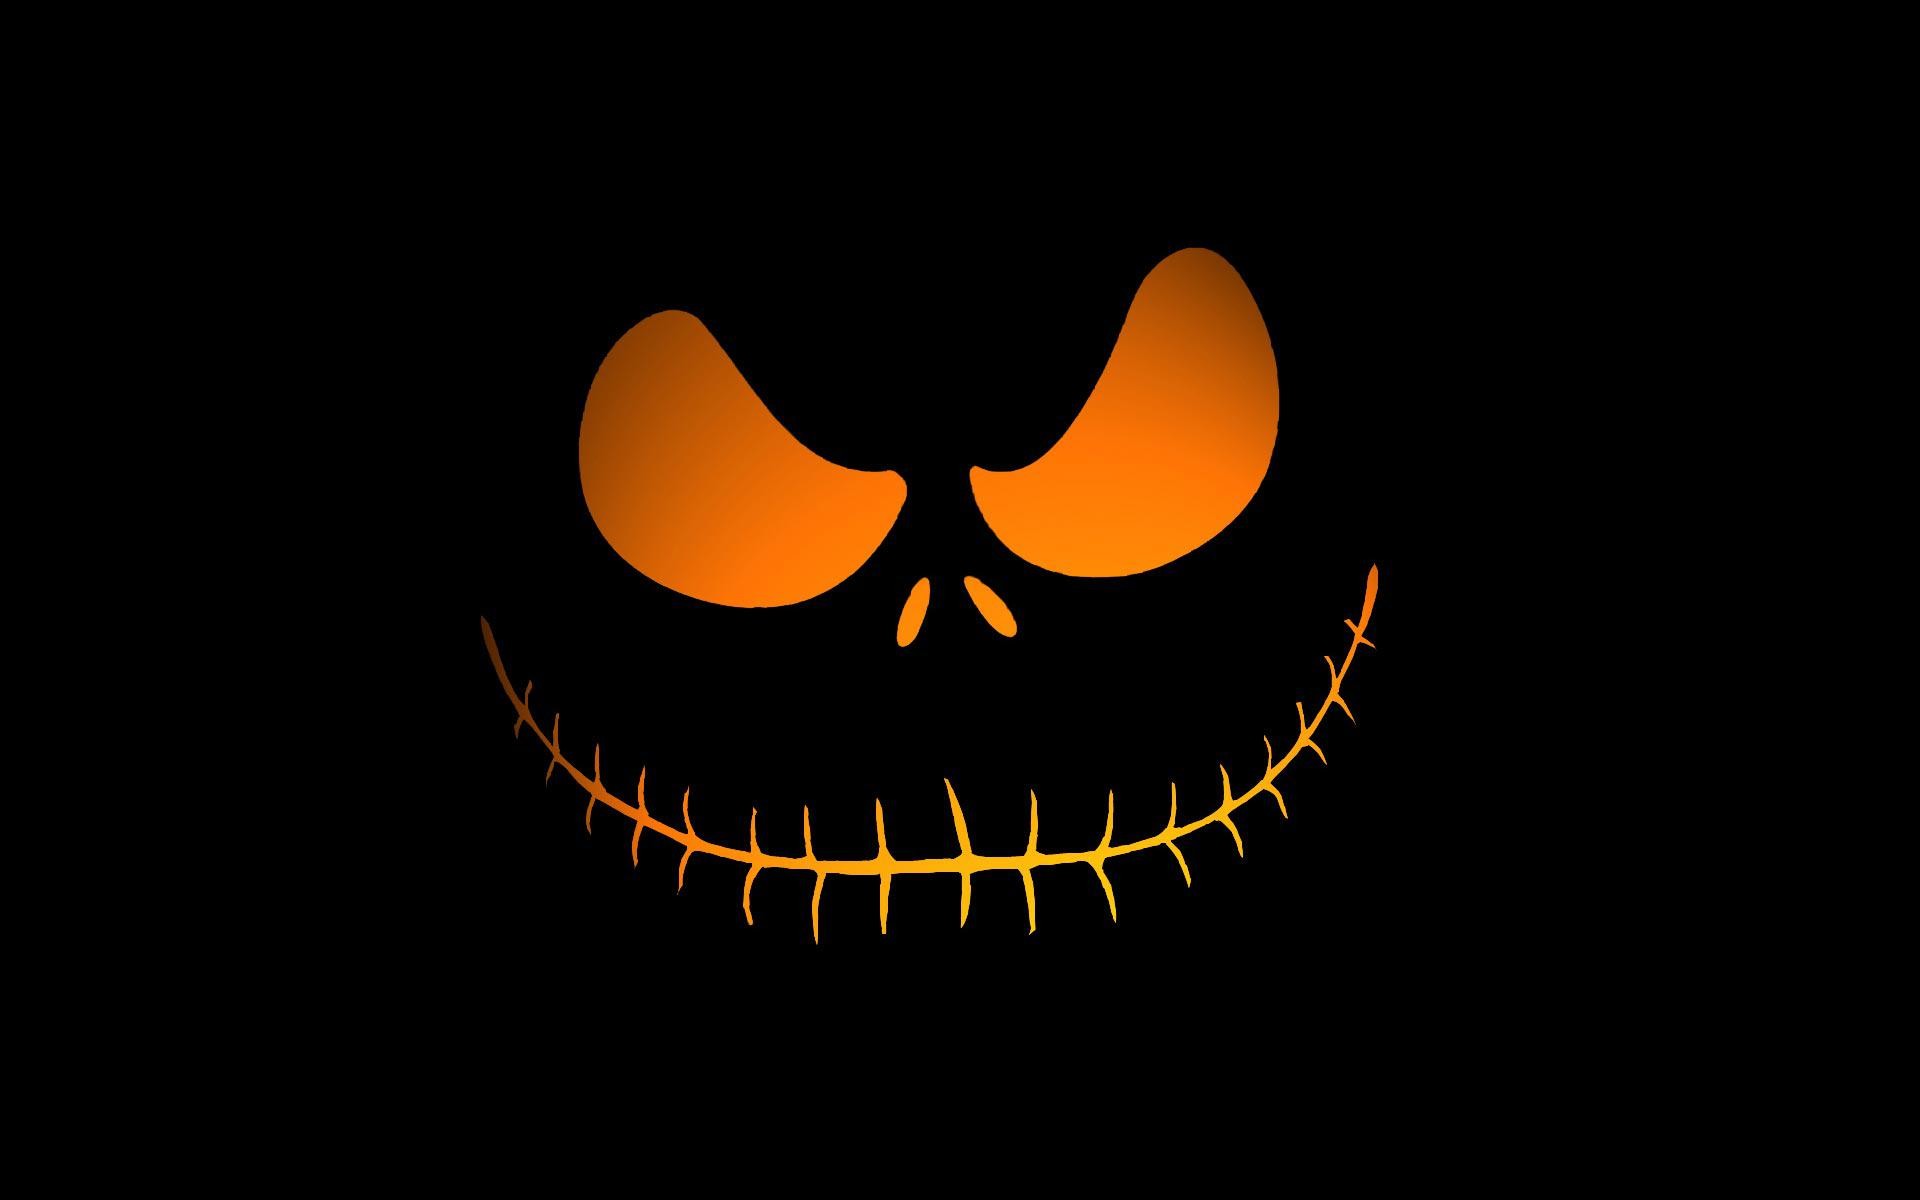  Evil Smile Wallpapers on WallpaperPlay